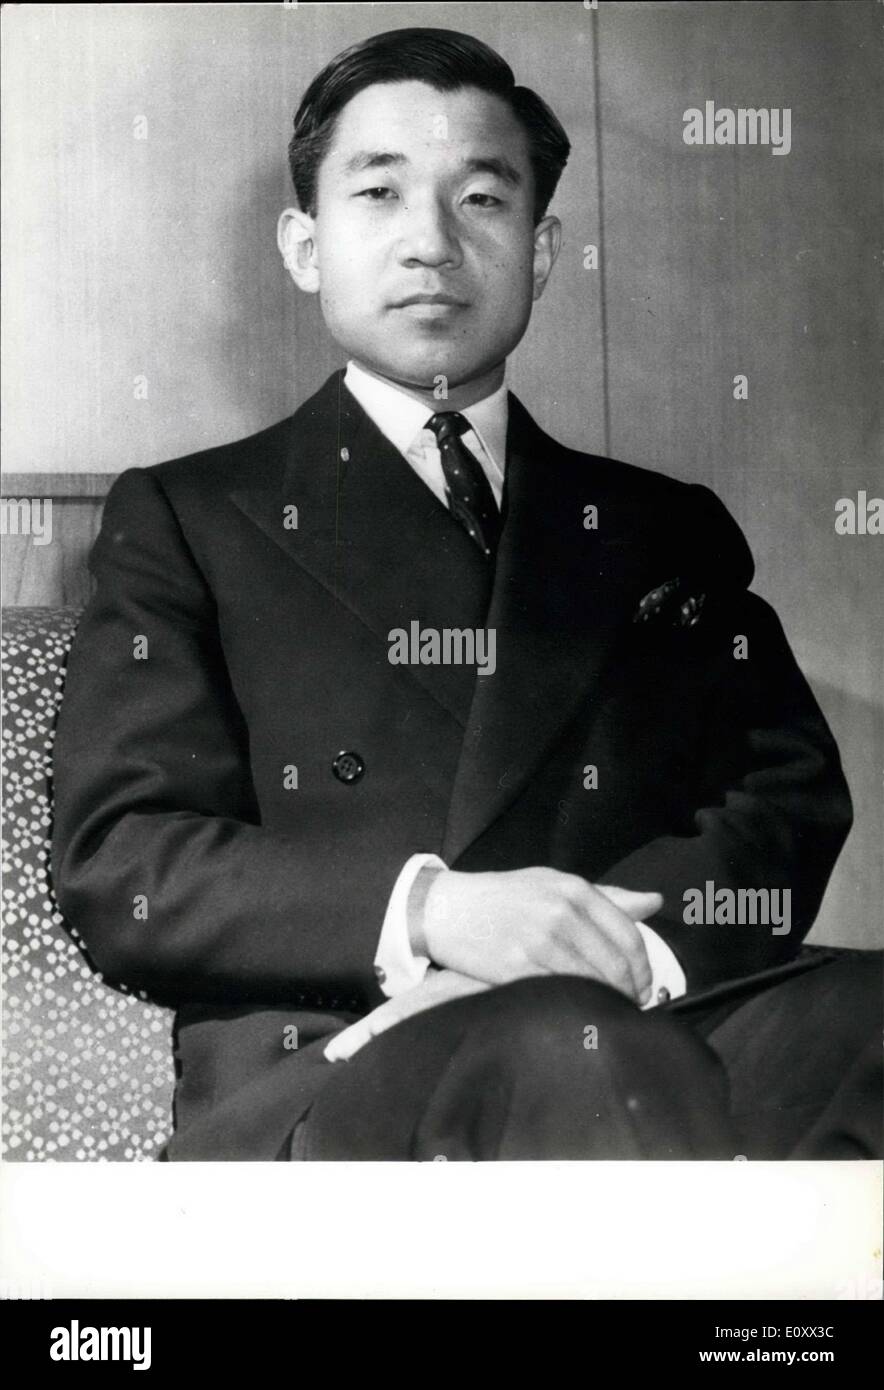 Dec. 23, 1967 - Crown Prince Celebrated 34th Birthday. Crown Prince Akihito of Japan celebrates his 34th birthday on Decembr 23, 1967. Photo shows A recent portrait of Crown Prince Akihito. Stock Photo